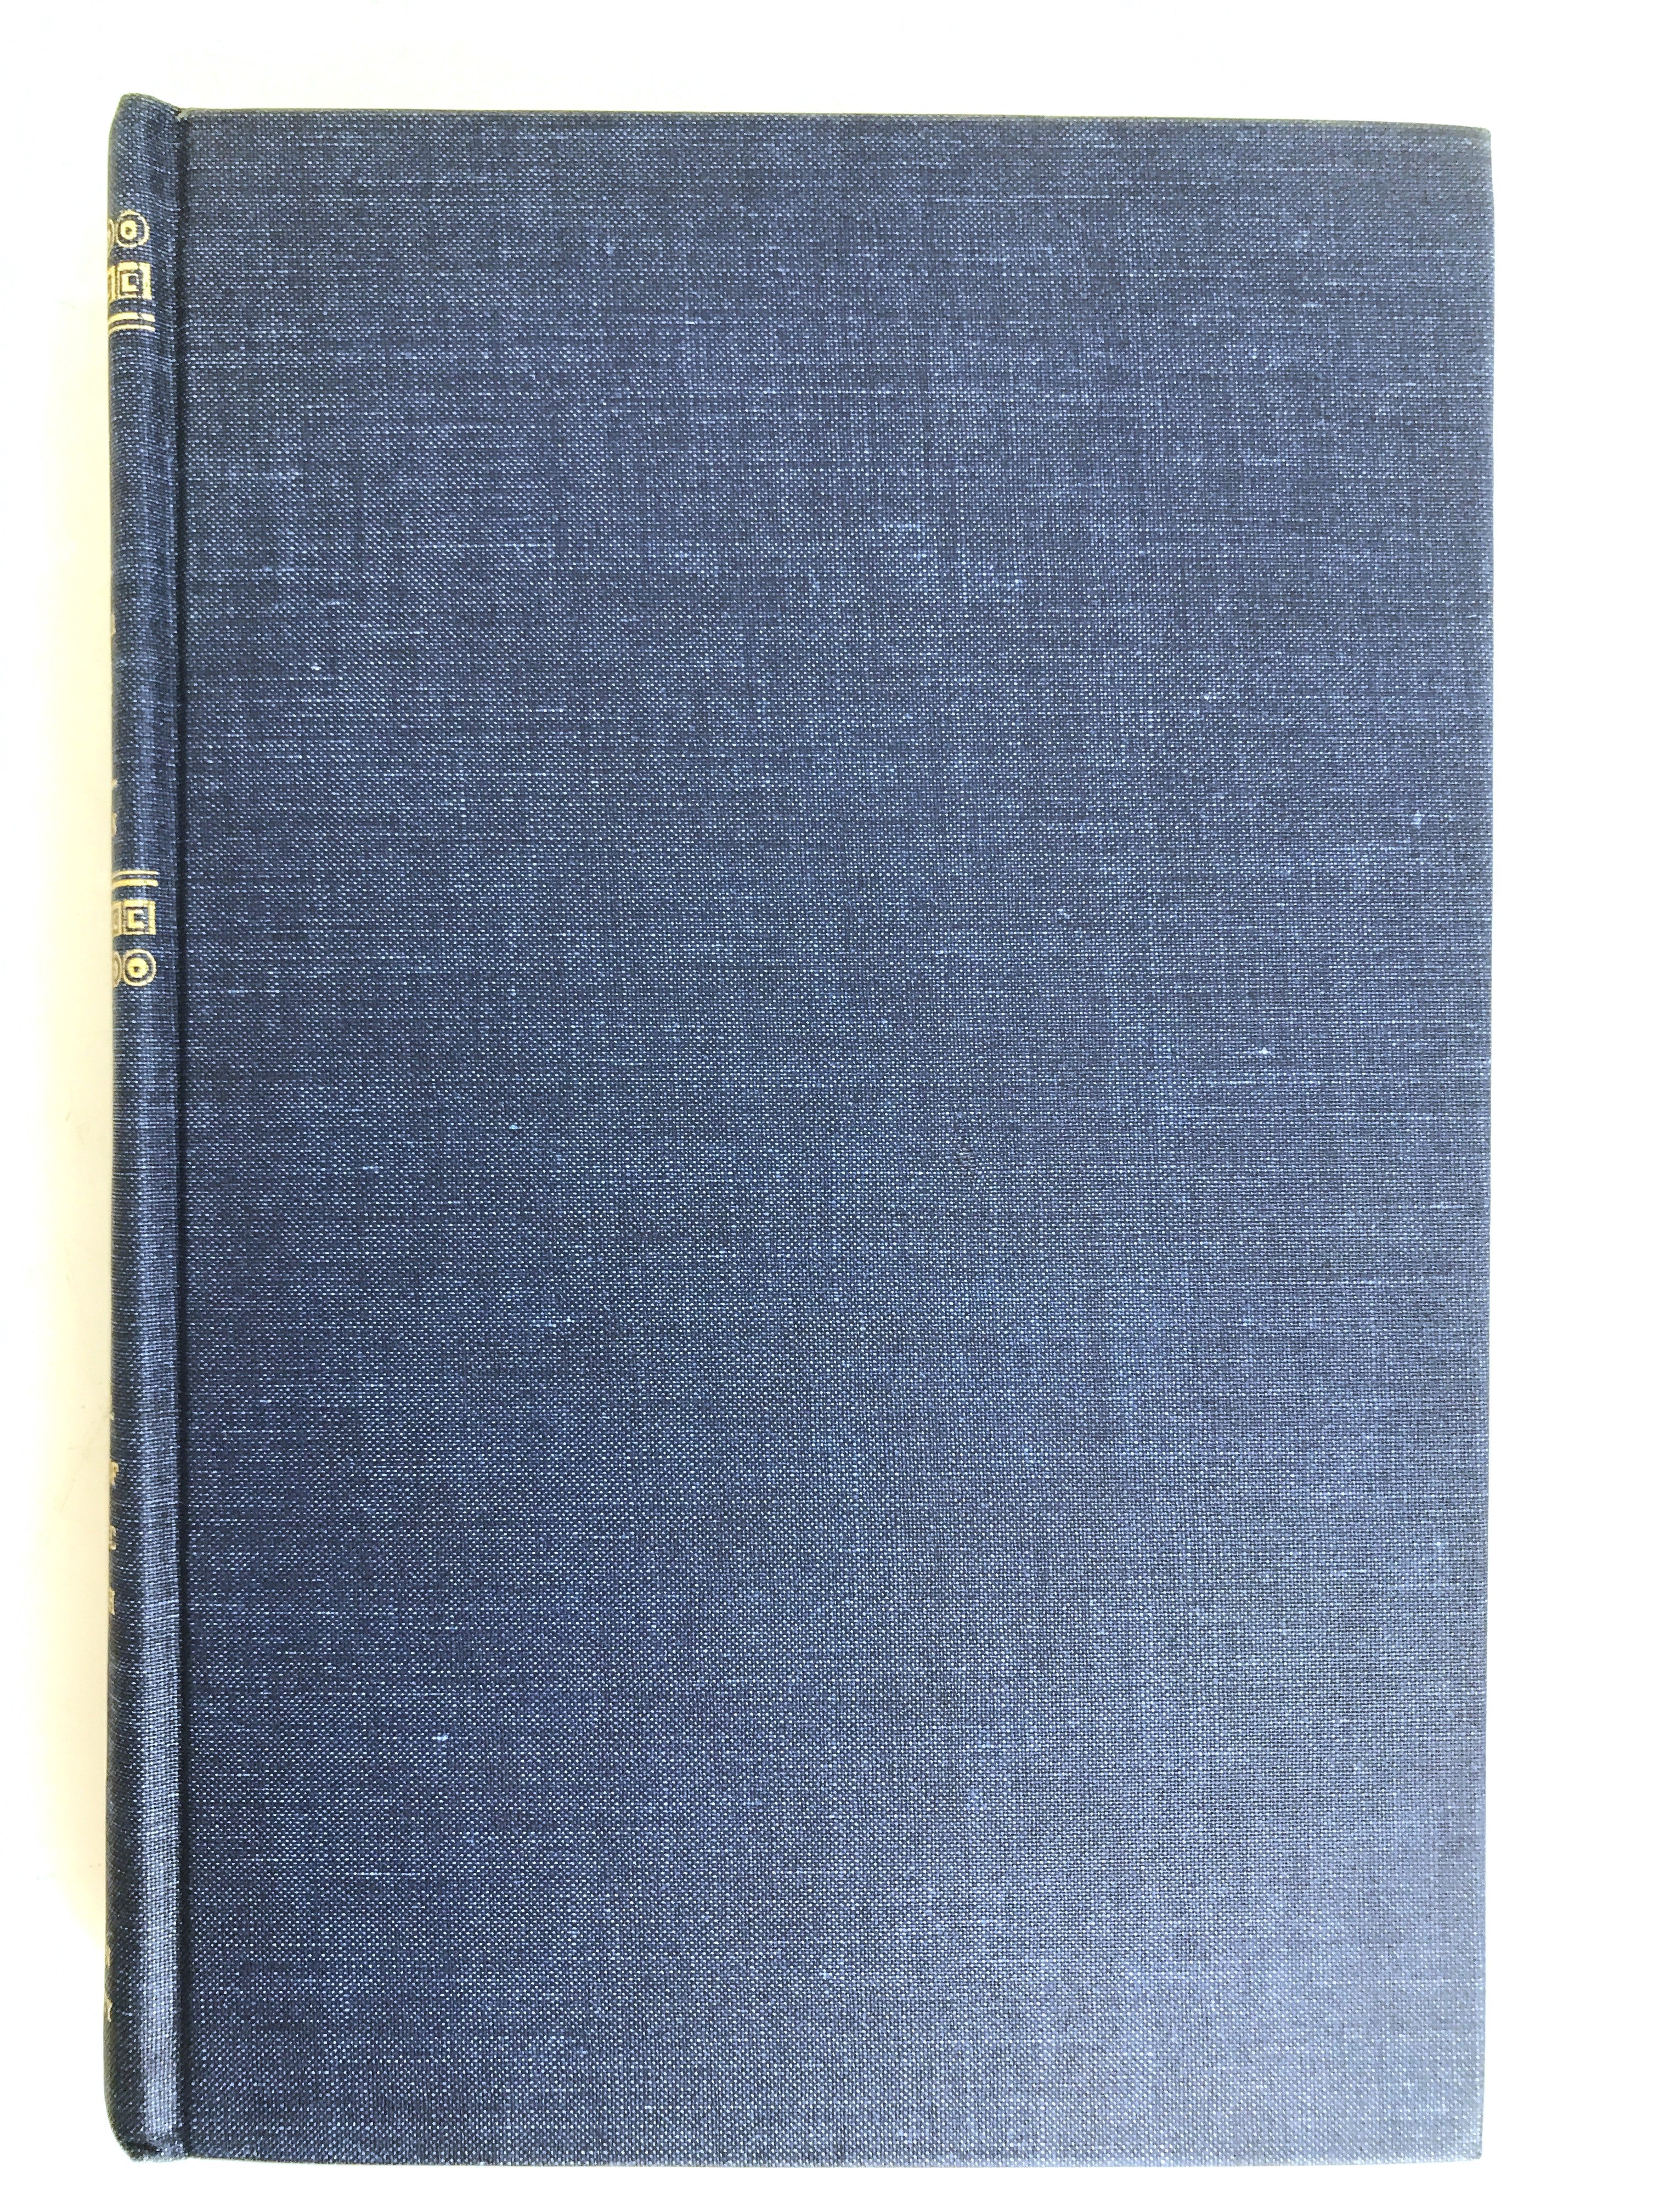 The Share of Top Wealth-Holders in National Wealth 1922-1956 Robert Lampman 1962 HC DJ